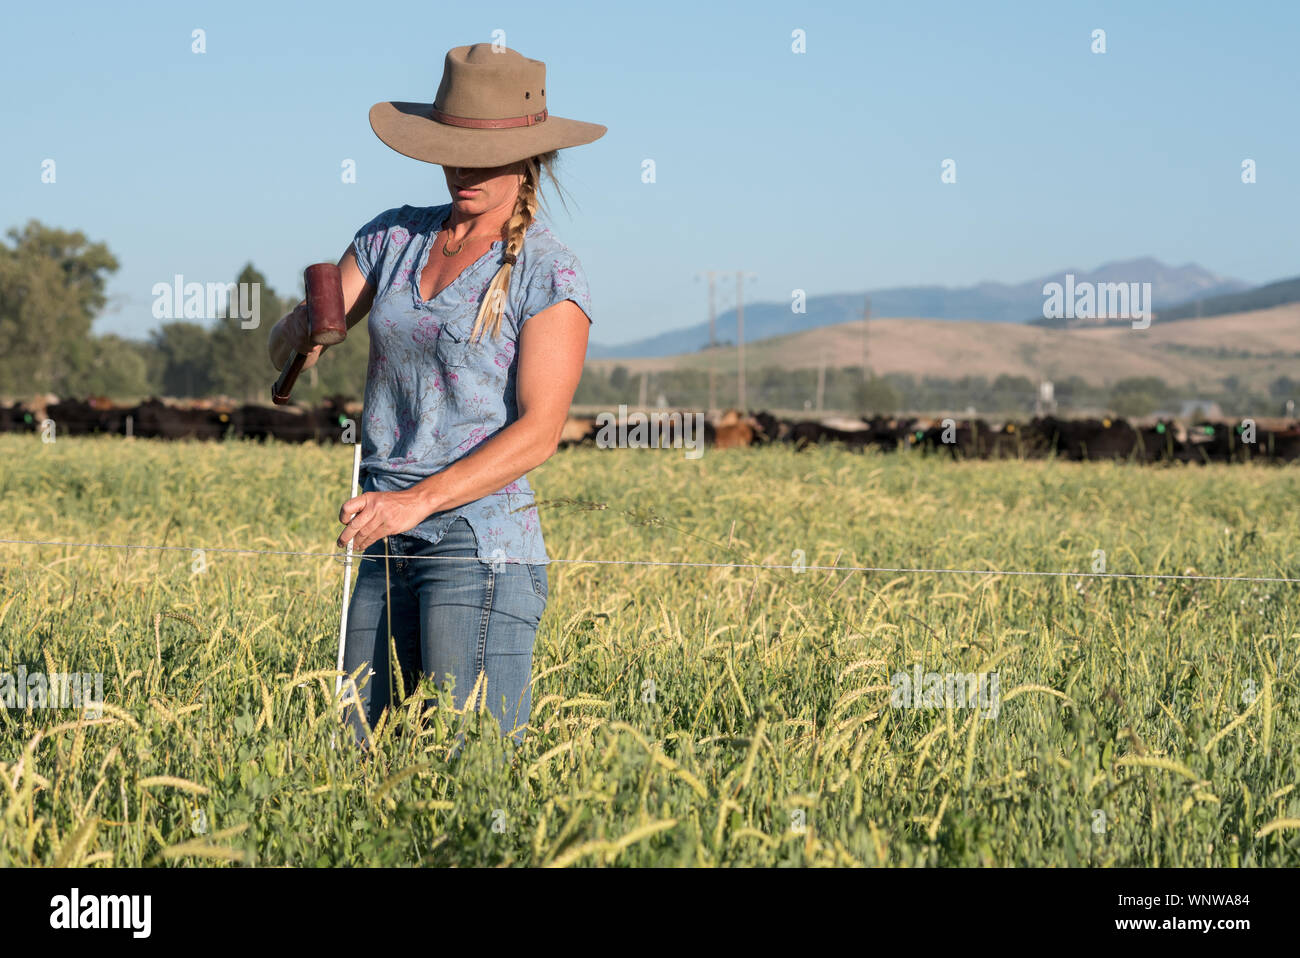 Installing an electric fence on a ranch in Oregon's Wallowa Valley. Stock Photo